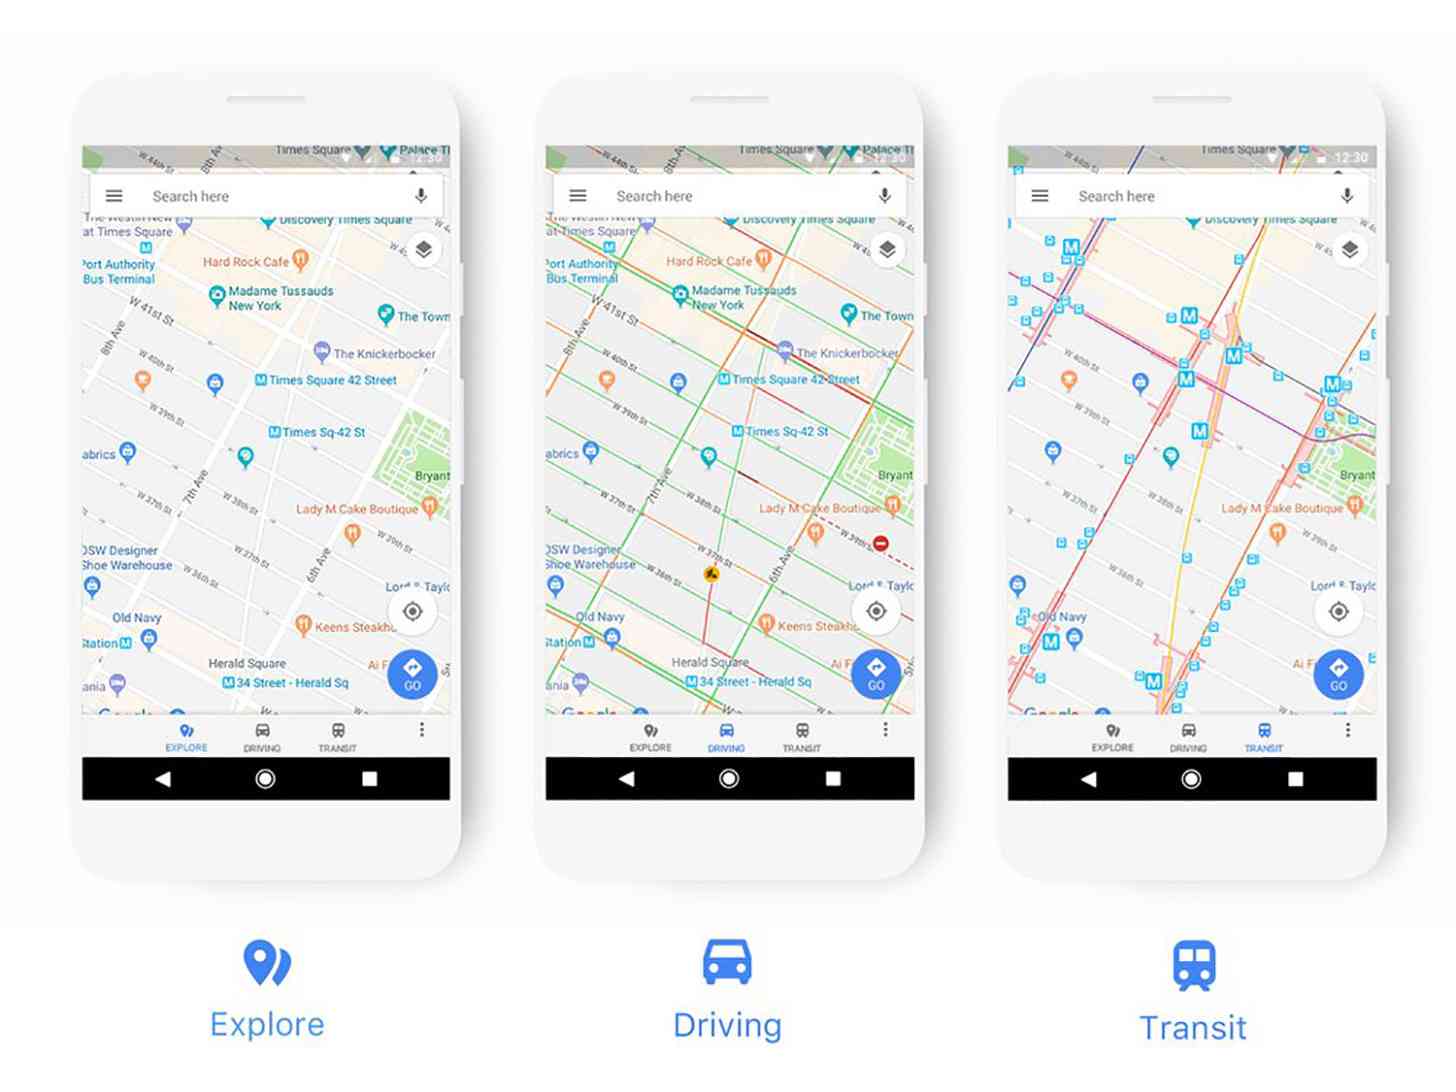 Google Maps updated user interface